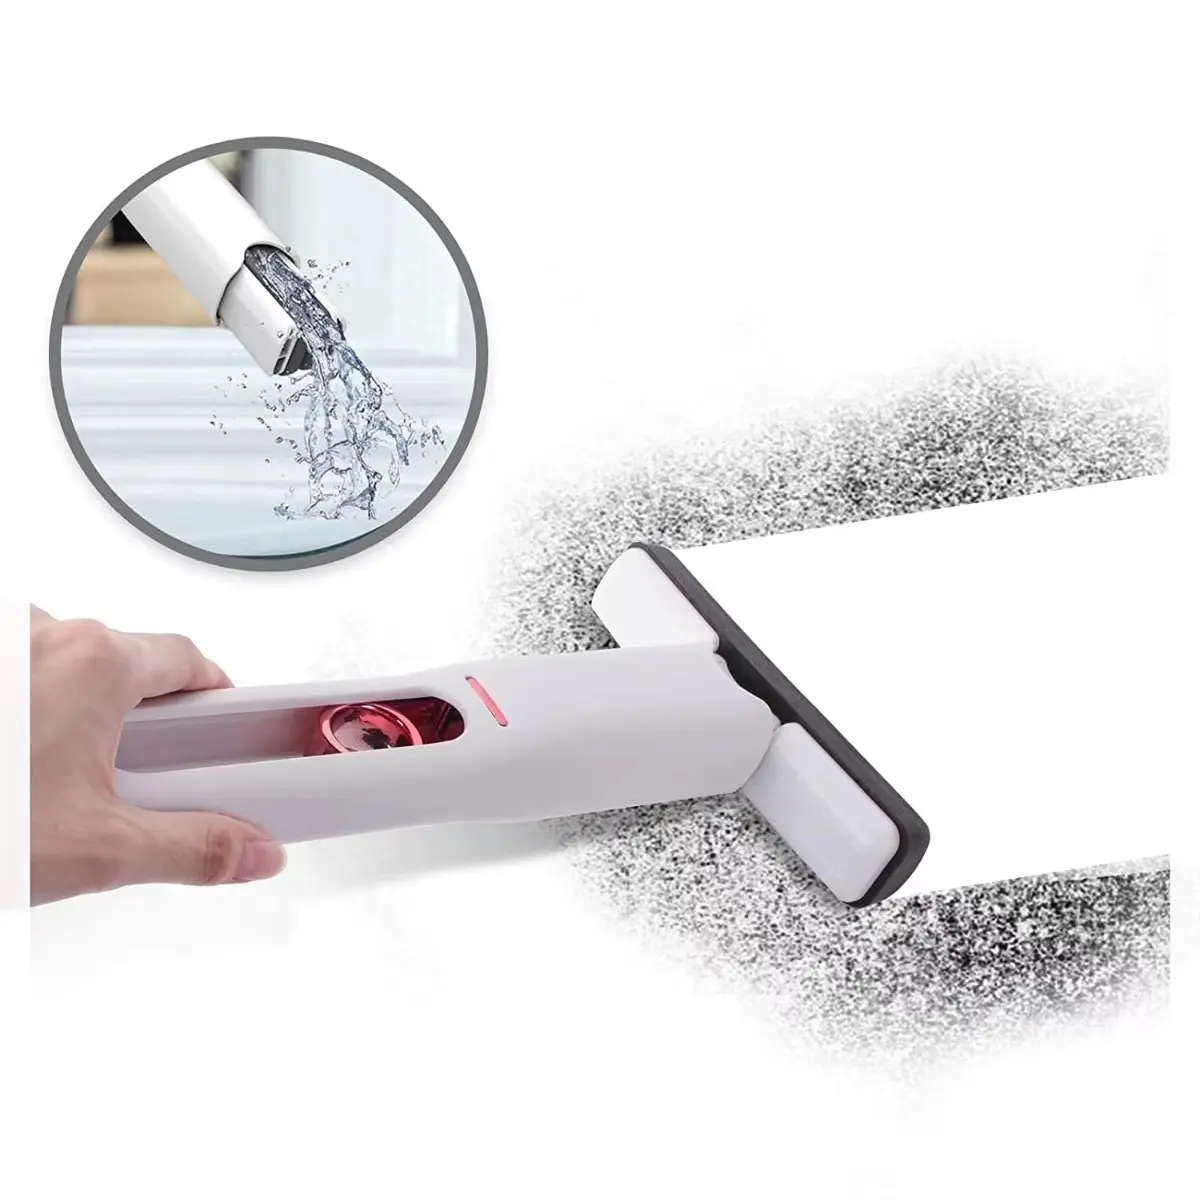 New Hot Sale Home Kitchen Tableware Desk Cleaning Tool Handhold Car Hand-free Washable Room Daily Glass Squeeze MINI Sponge Mop